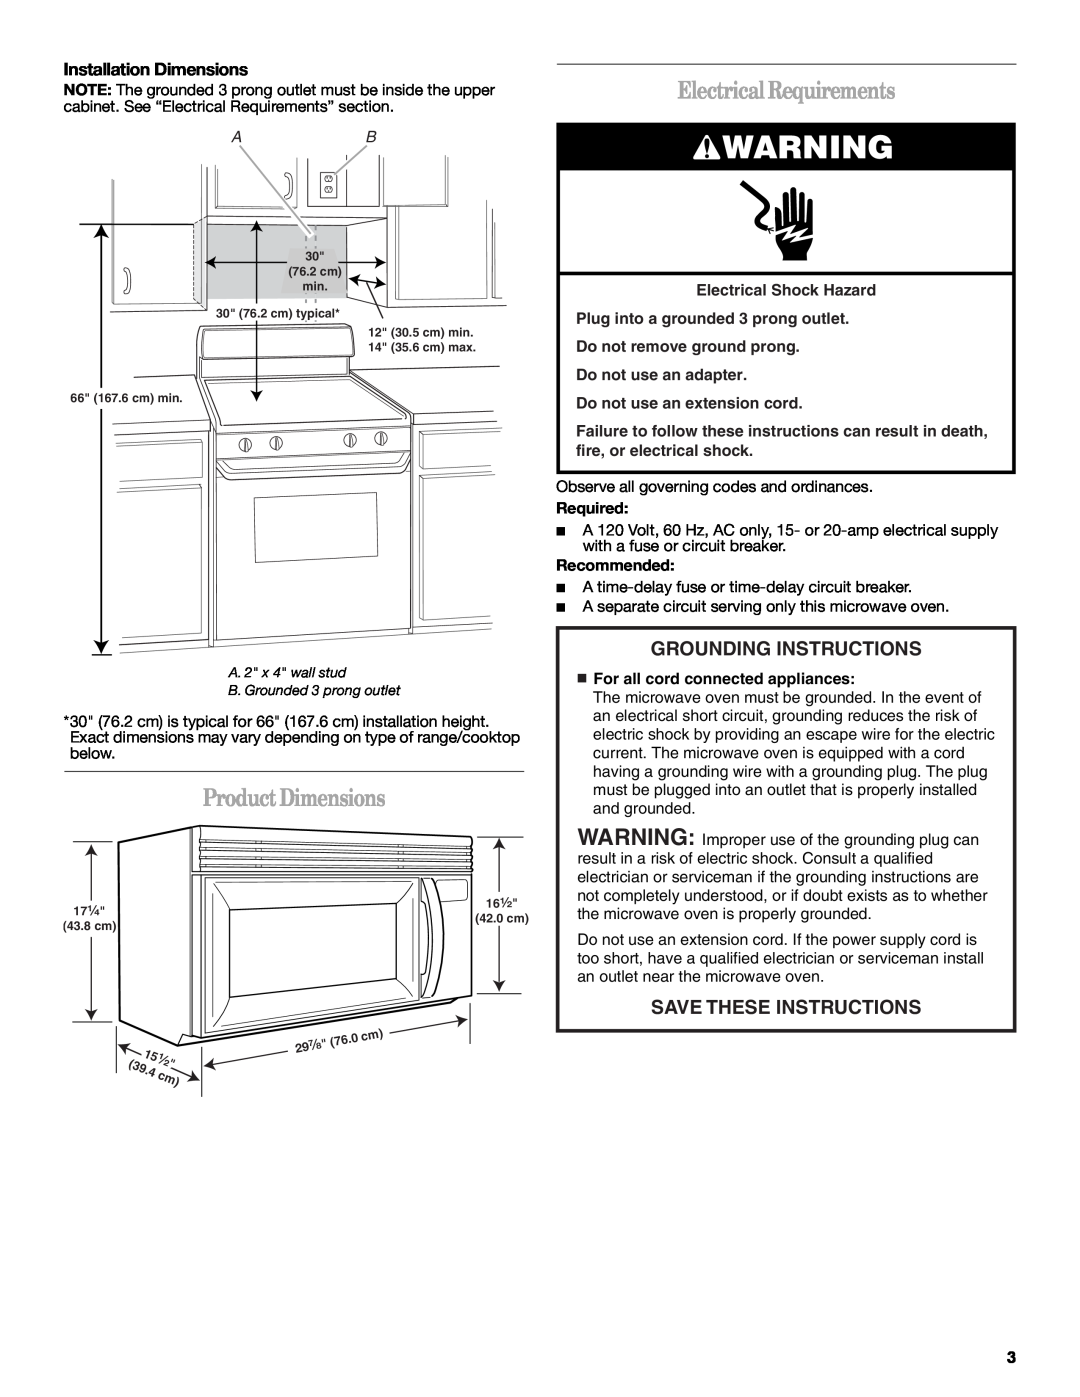 Whirlpool MH3184XPS5 ProductDimensions, ElectricalRequirements, Installation Dimensions, Do not use an extension cord 